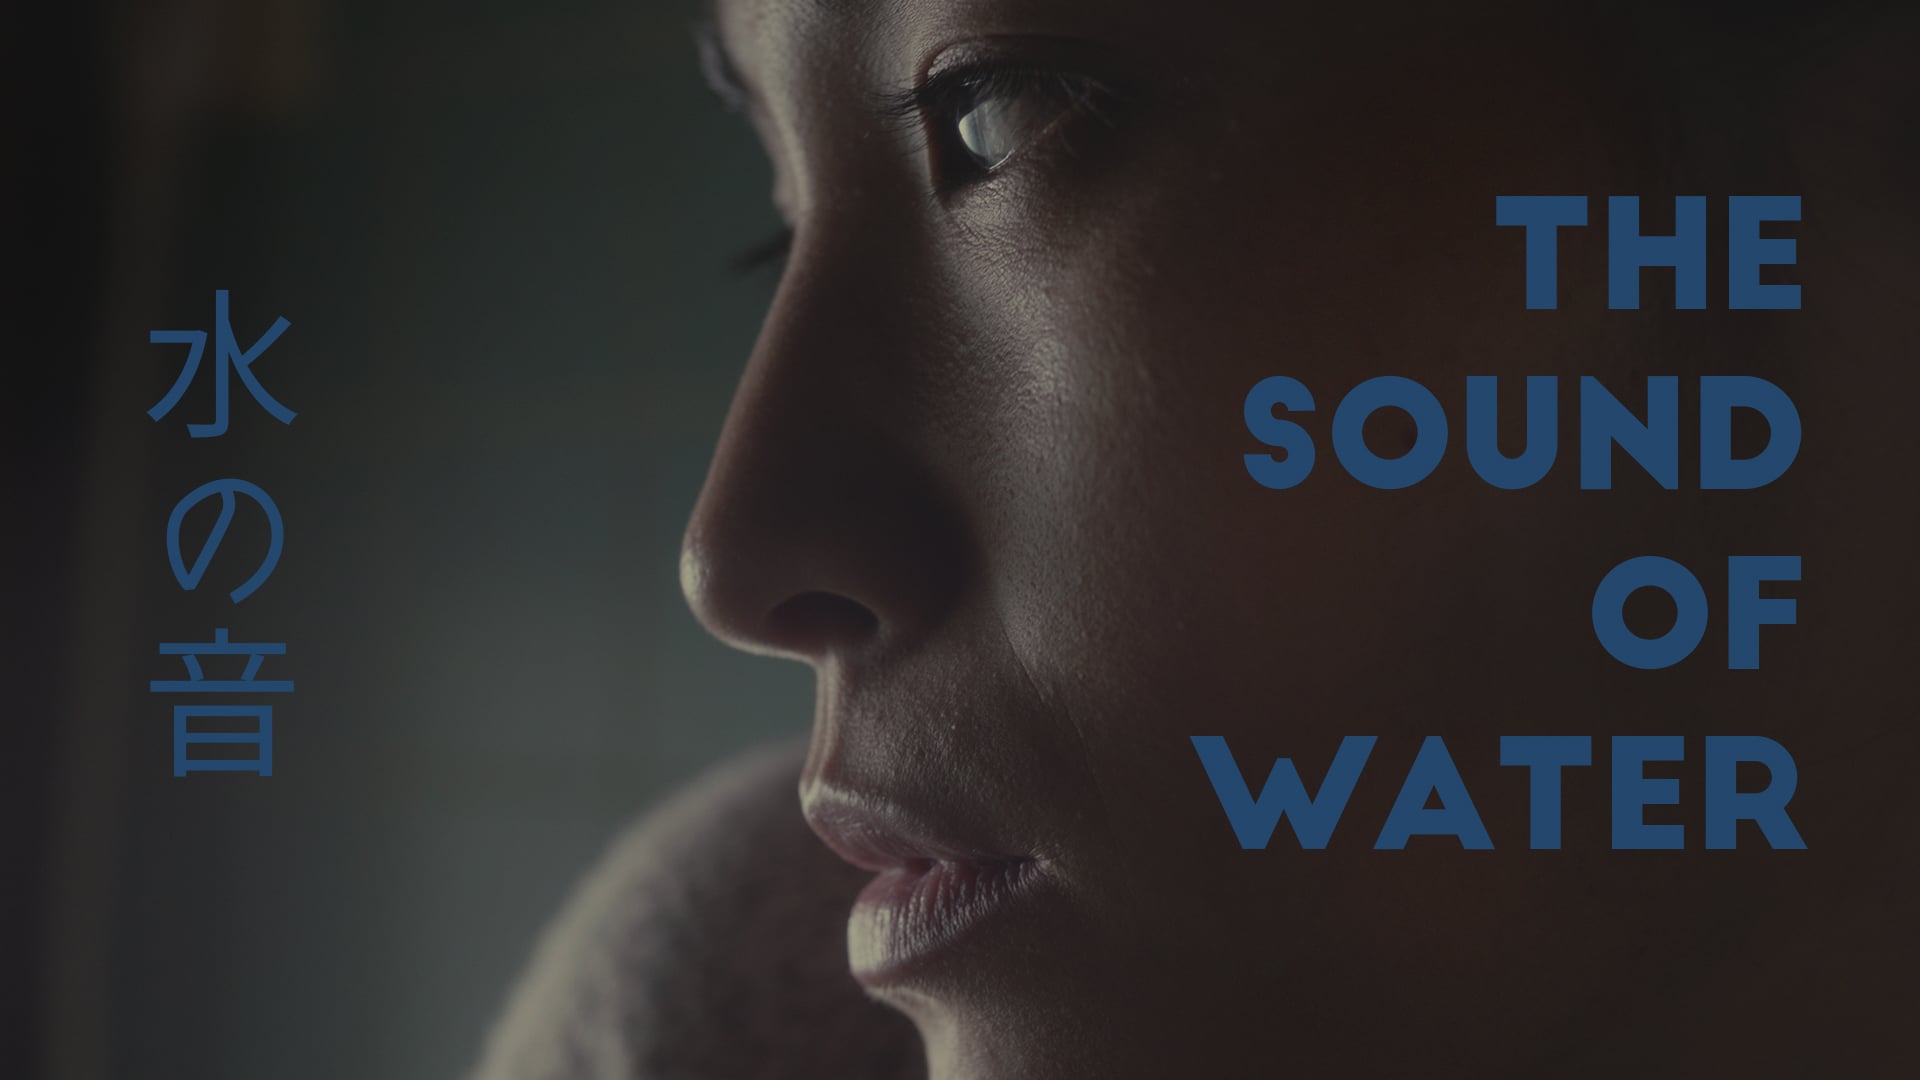 THE SOUND OF WATER | Short Film 
directed by J.B. BRAUD | Trailer